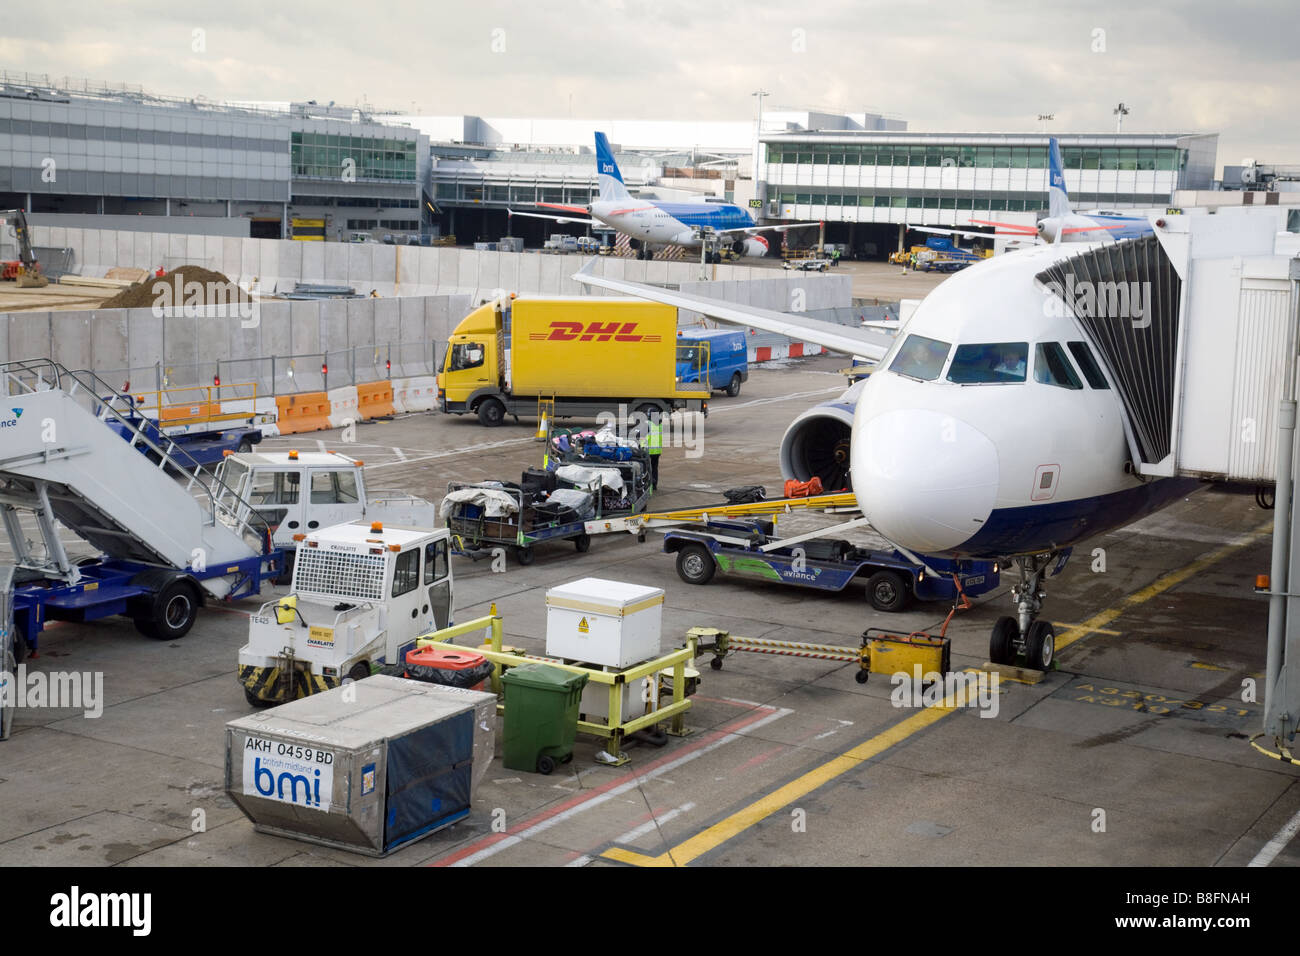 Baggage handlers and vehicles around a A BMI plane on the tarmac at Terminal 1, Heathrow airport, London, UK Stock Photo